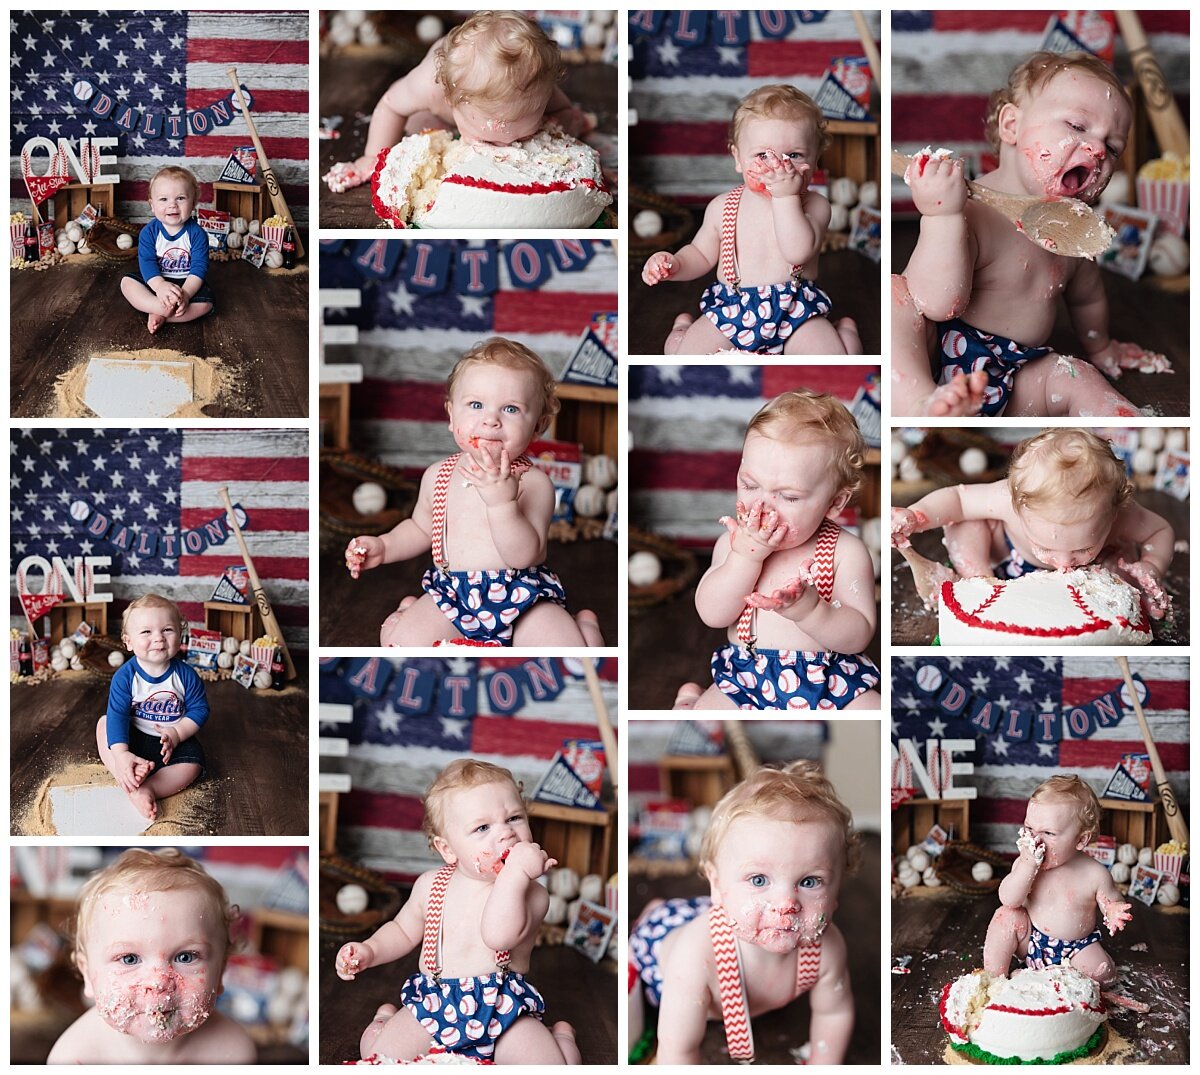 One Year old boy with a baseball theme cake smash.